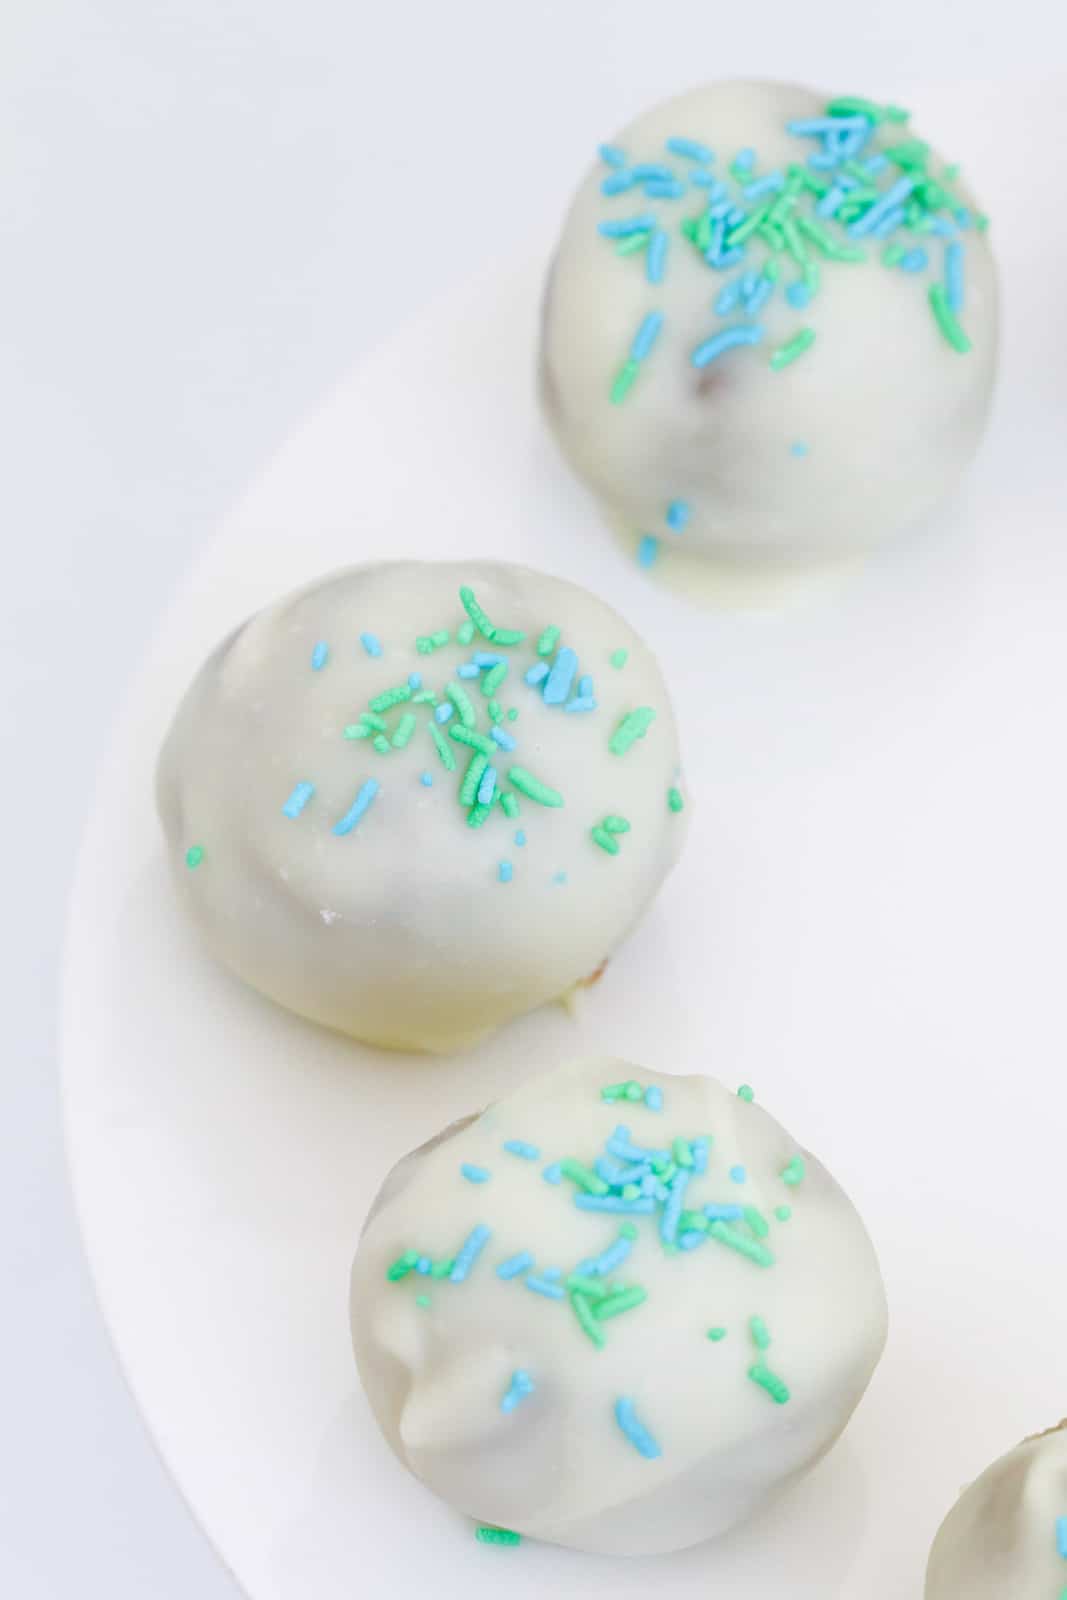 An overhead shot of white chocolate cheesecake balls decorated with sprinkles.